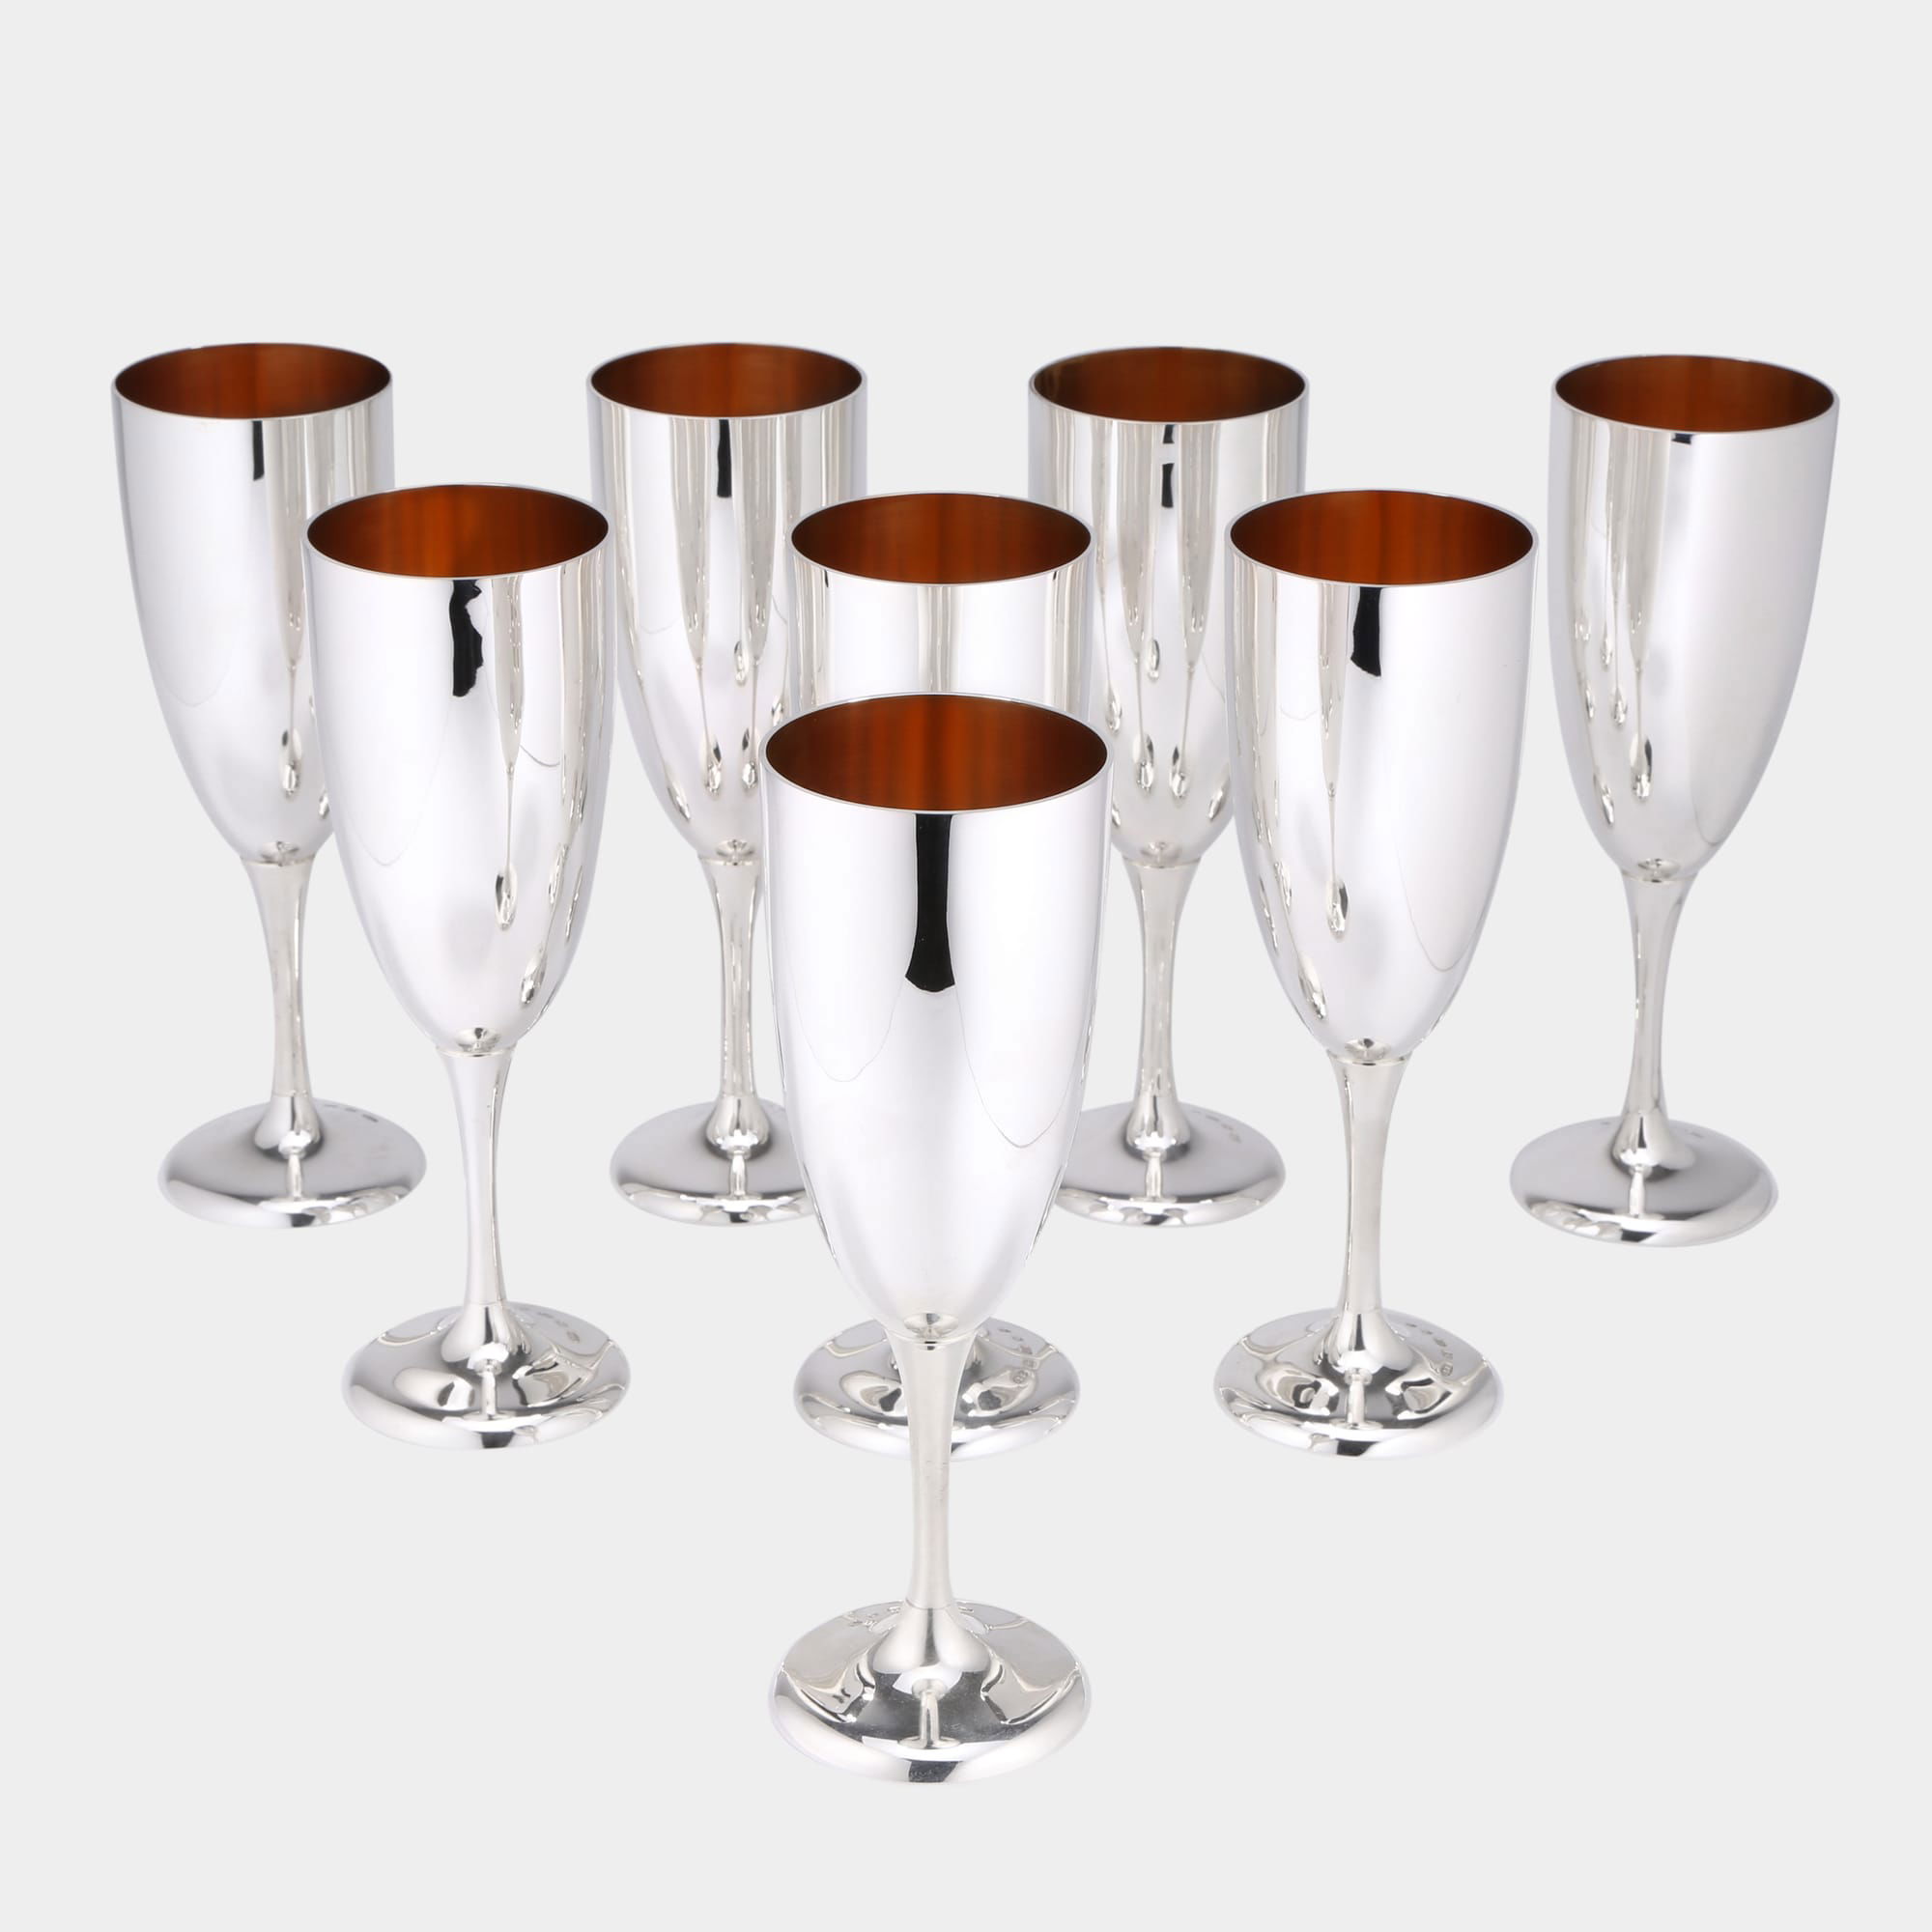 Gilt lined silver champagne flutes